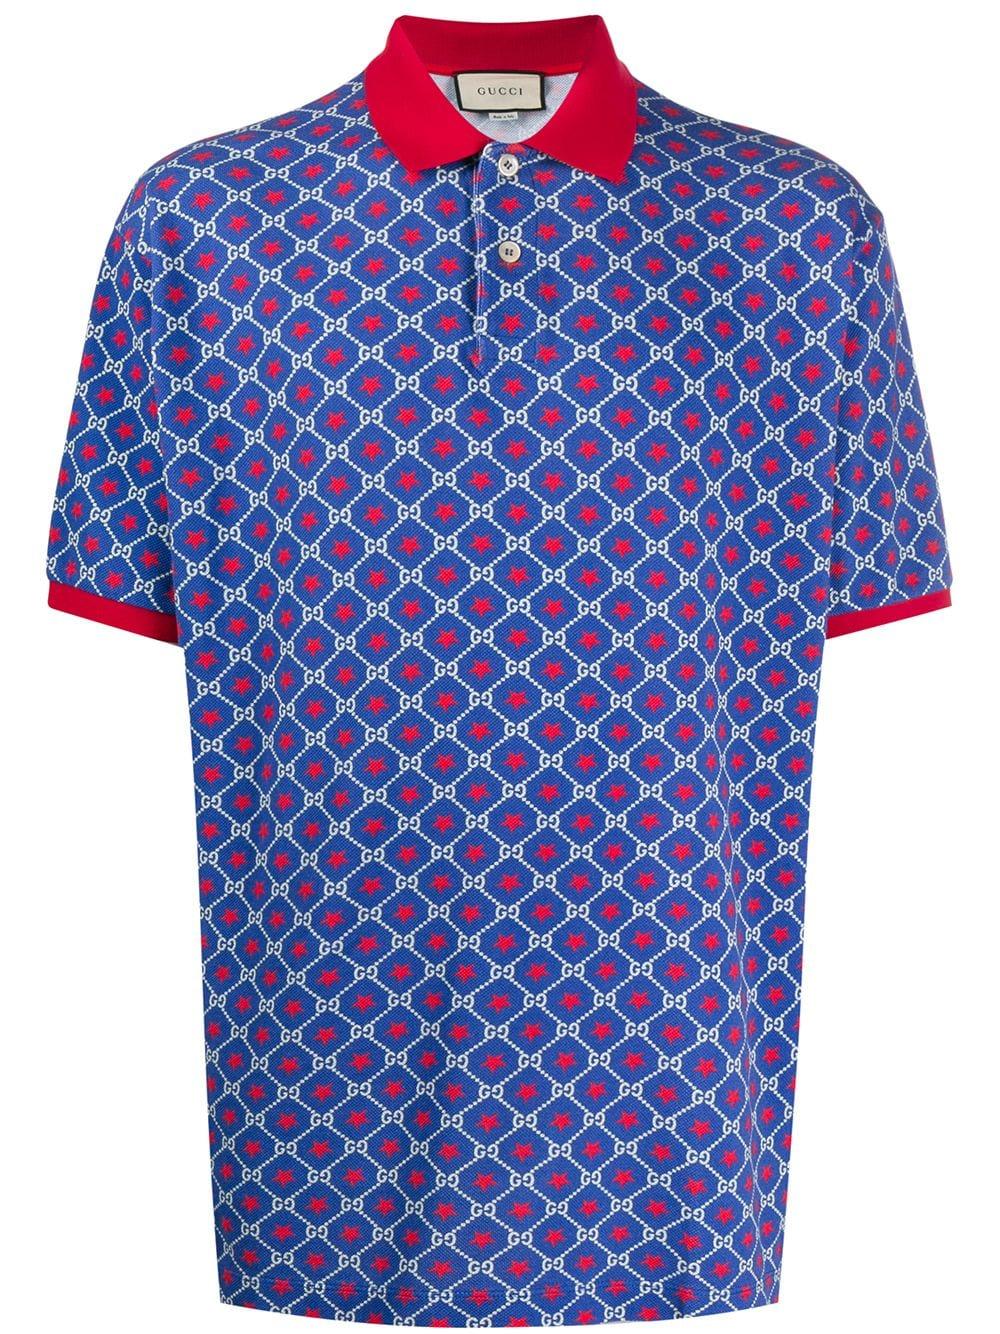 Gucci Cotton GG Pattern Polo Shirt in Blue for Men - Lyst